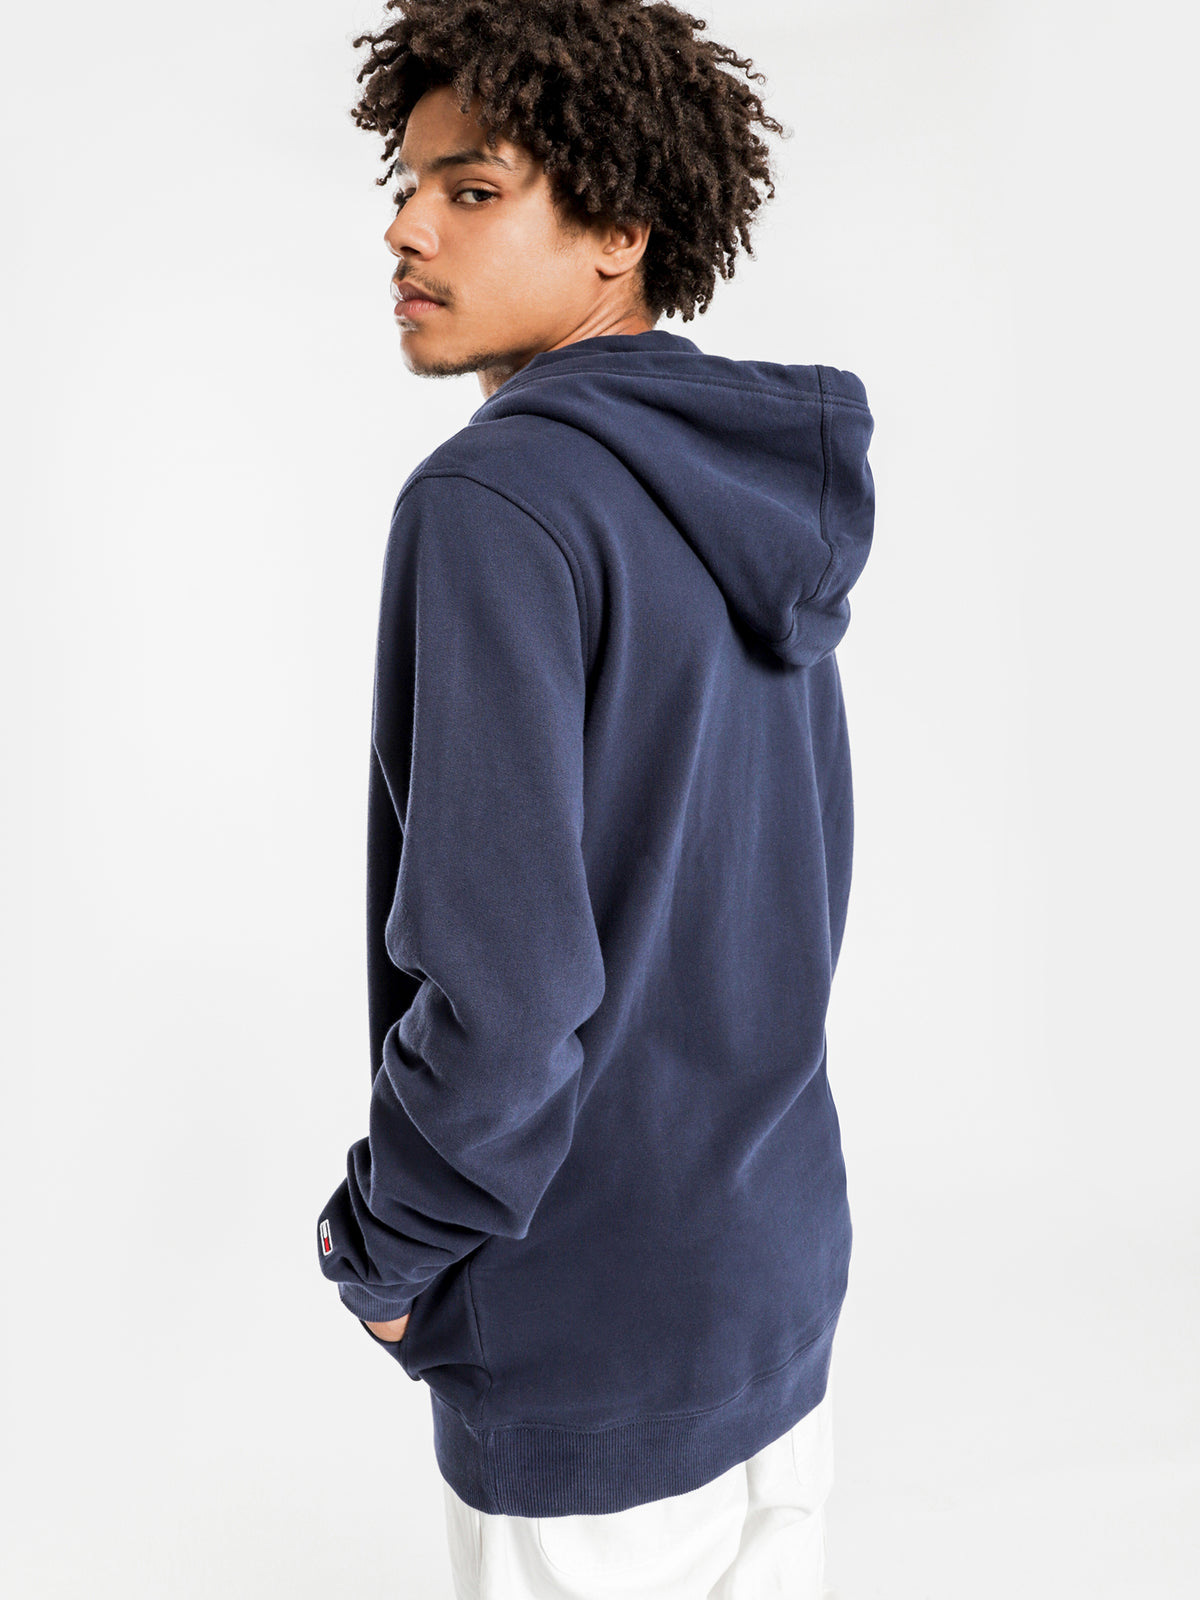 Essential Graphic Hoodie in Navy